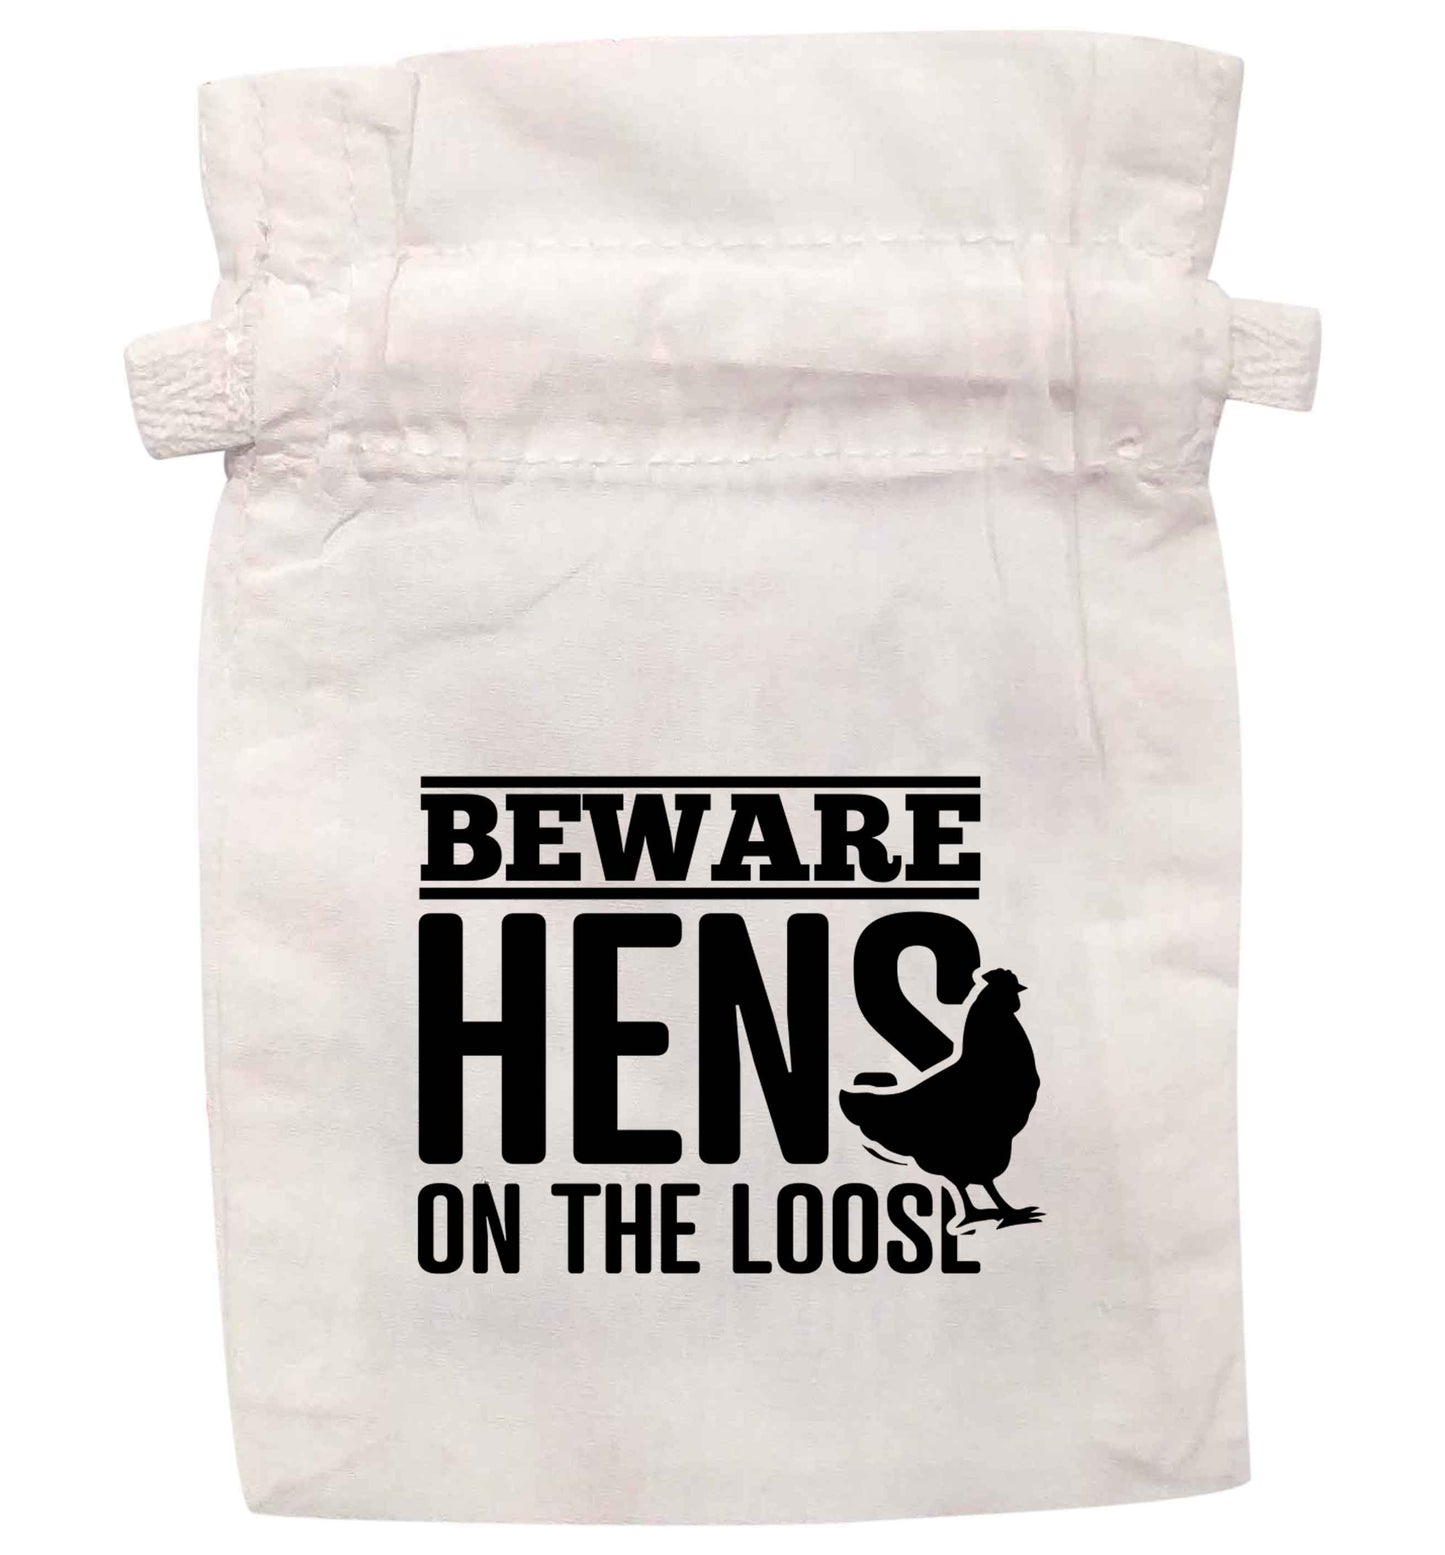 Beware hens on the loose | XS - L | Pouch / Drawstring bag / Sack | Organic Cotton | Bulk discounts available!